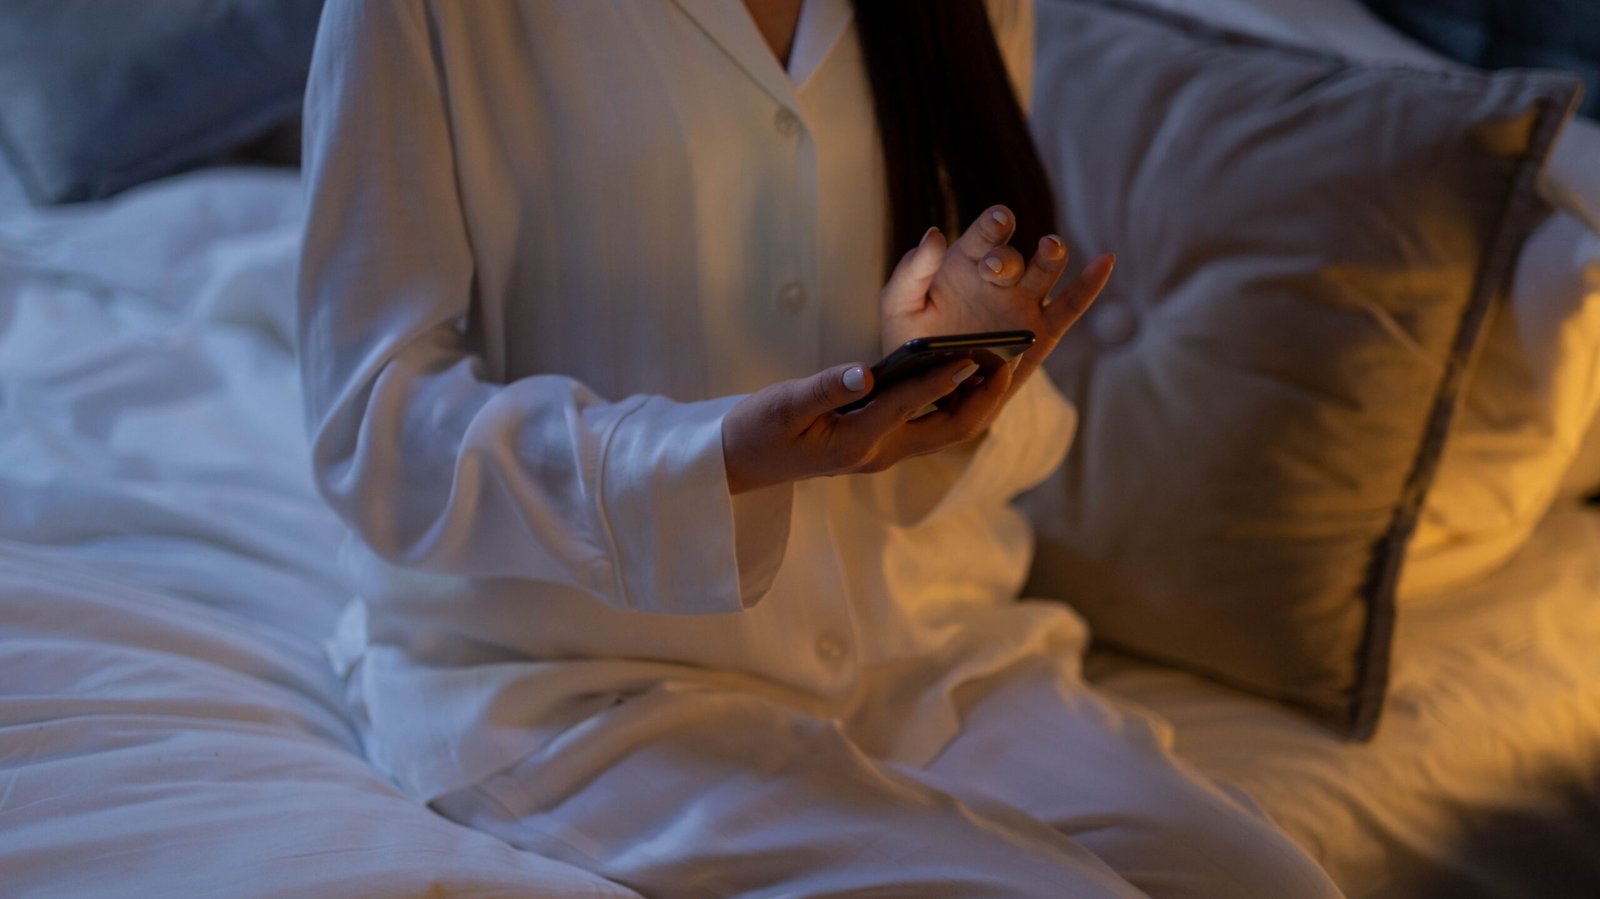 A woman using her phone in bed which is bad for sleep due to the light emitted